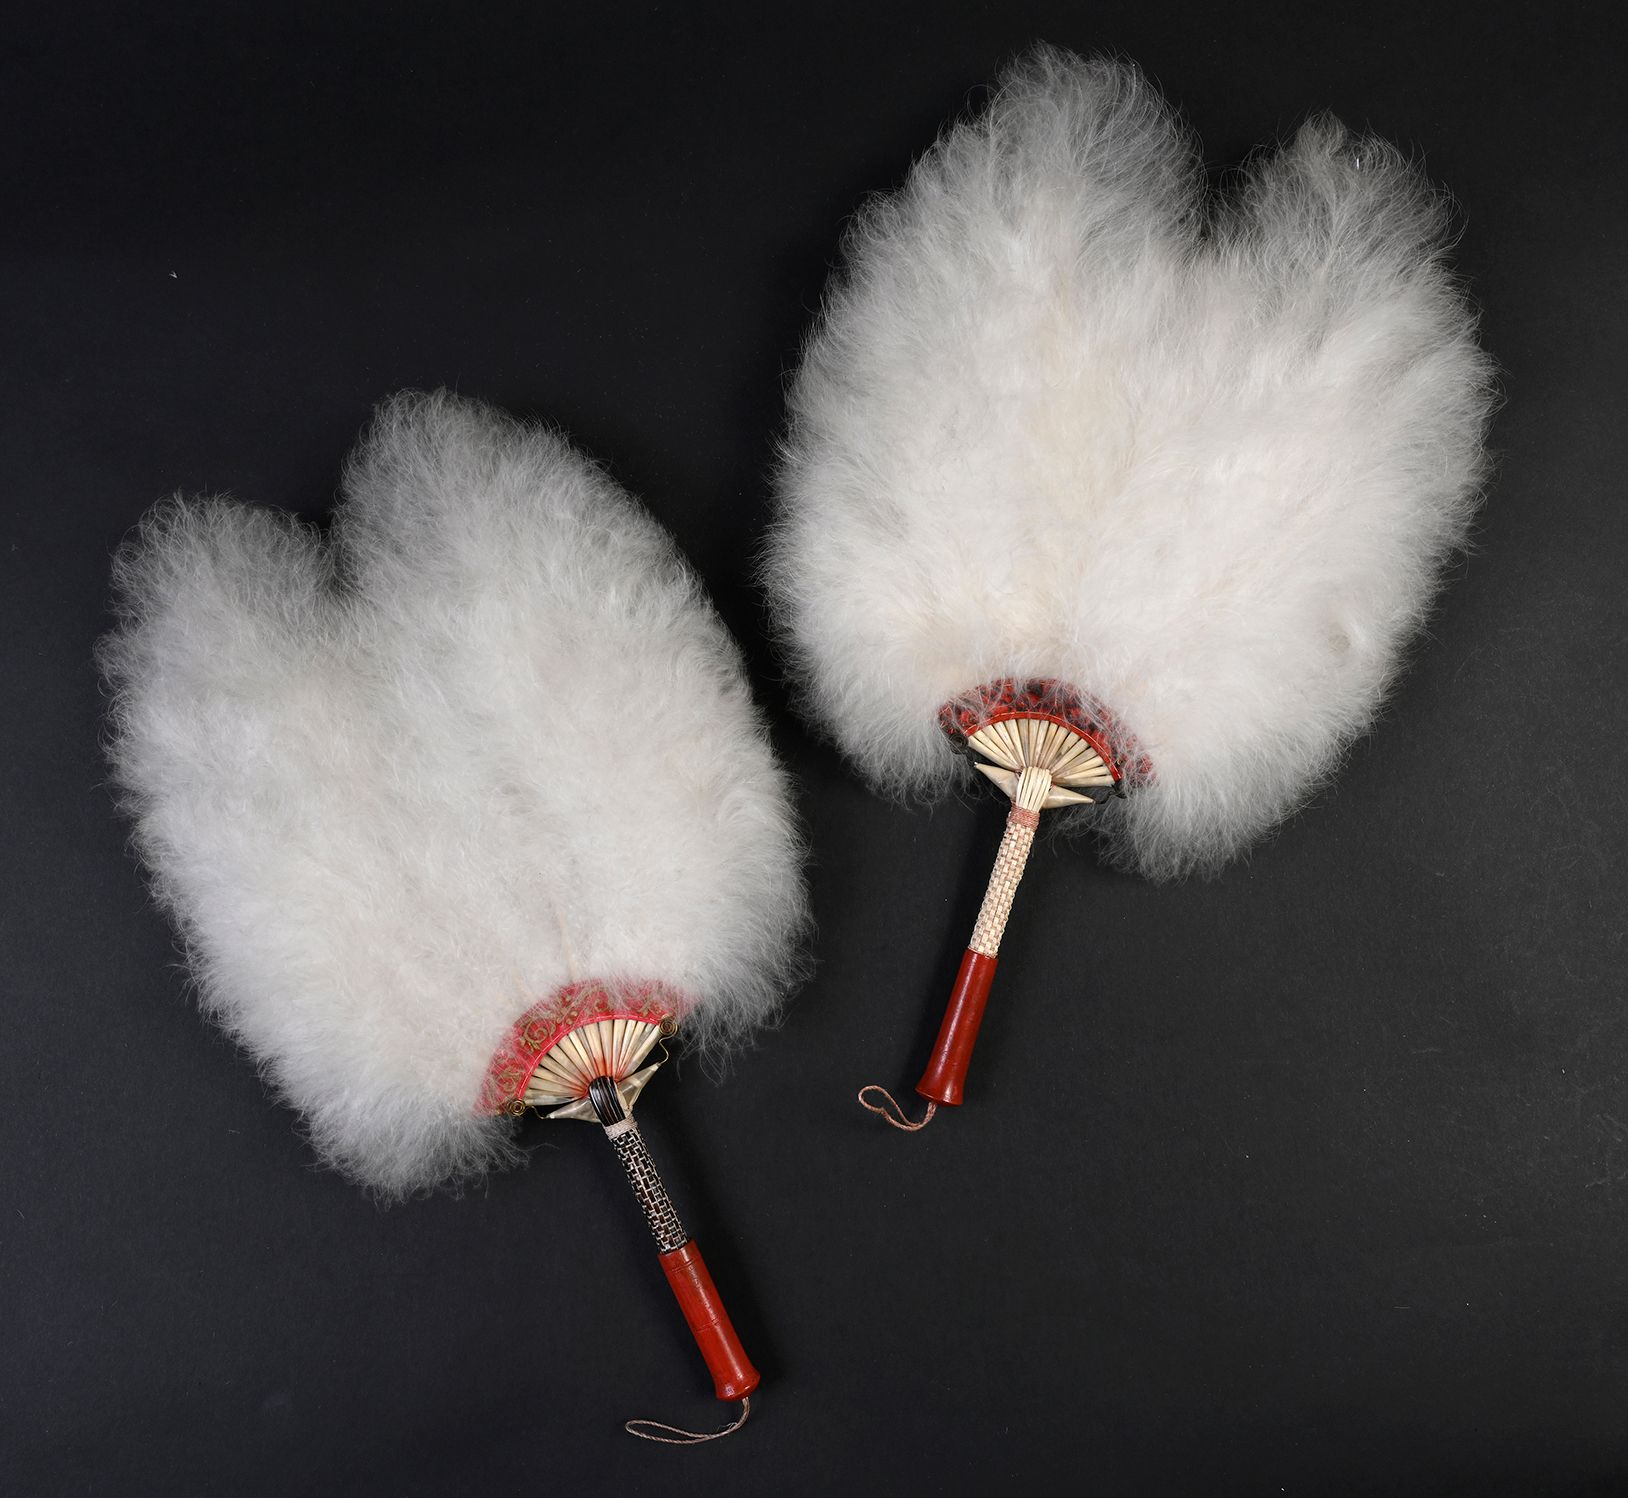 Null Marabou, China, 19th century
Pair of hand screens made of marabou feathers.&hellip;